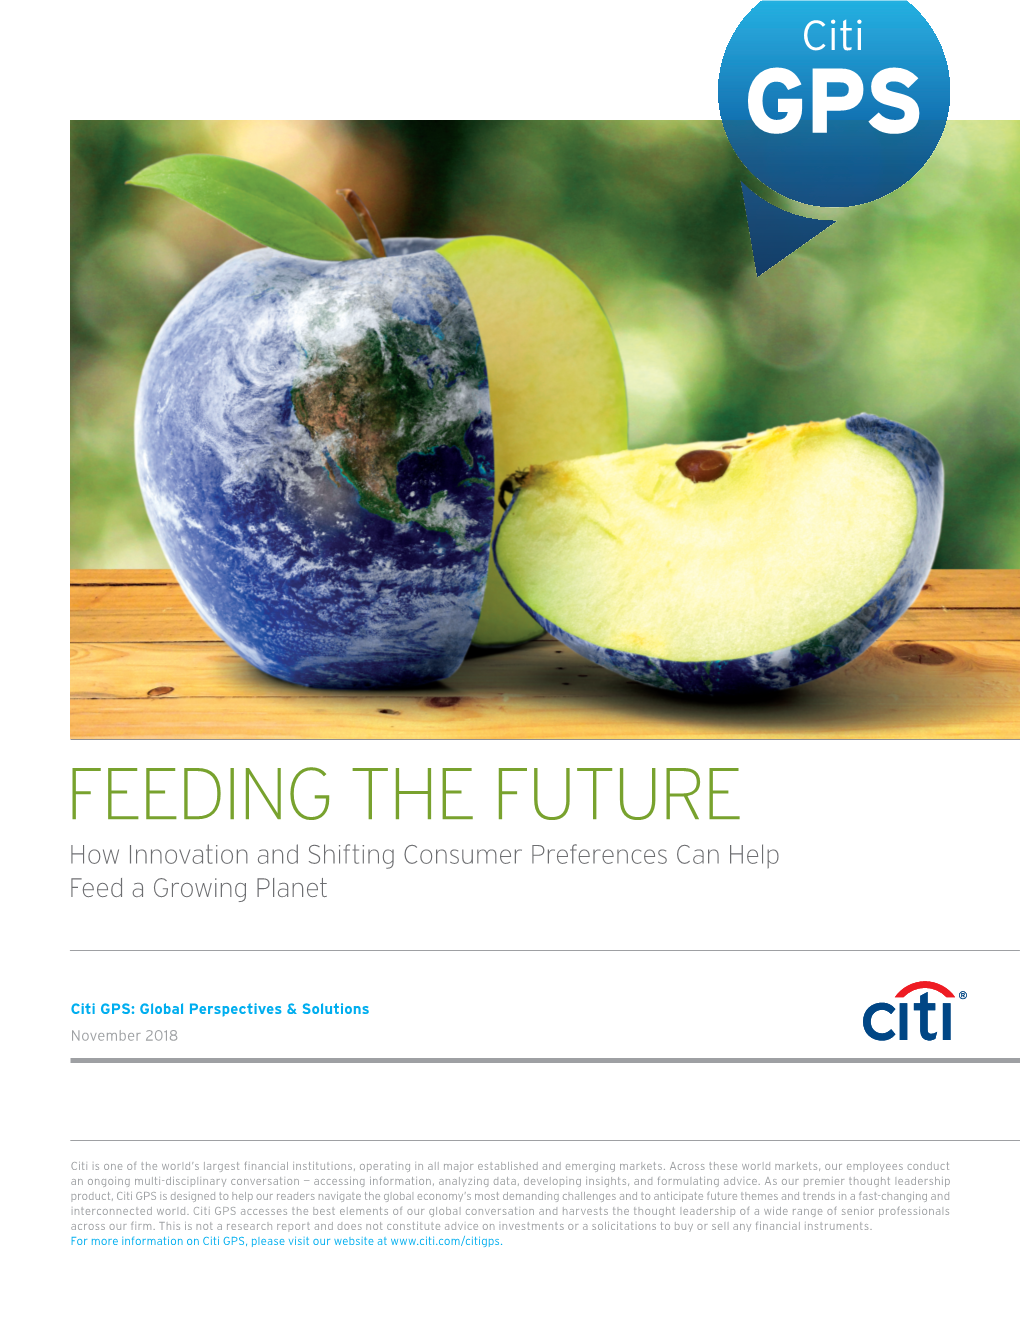 FEEDING the FUTURE How Innovation and Shifting Consumer Preferences Can Help Feed a Growing Planet